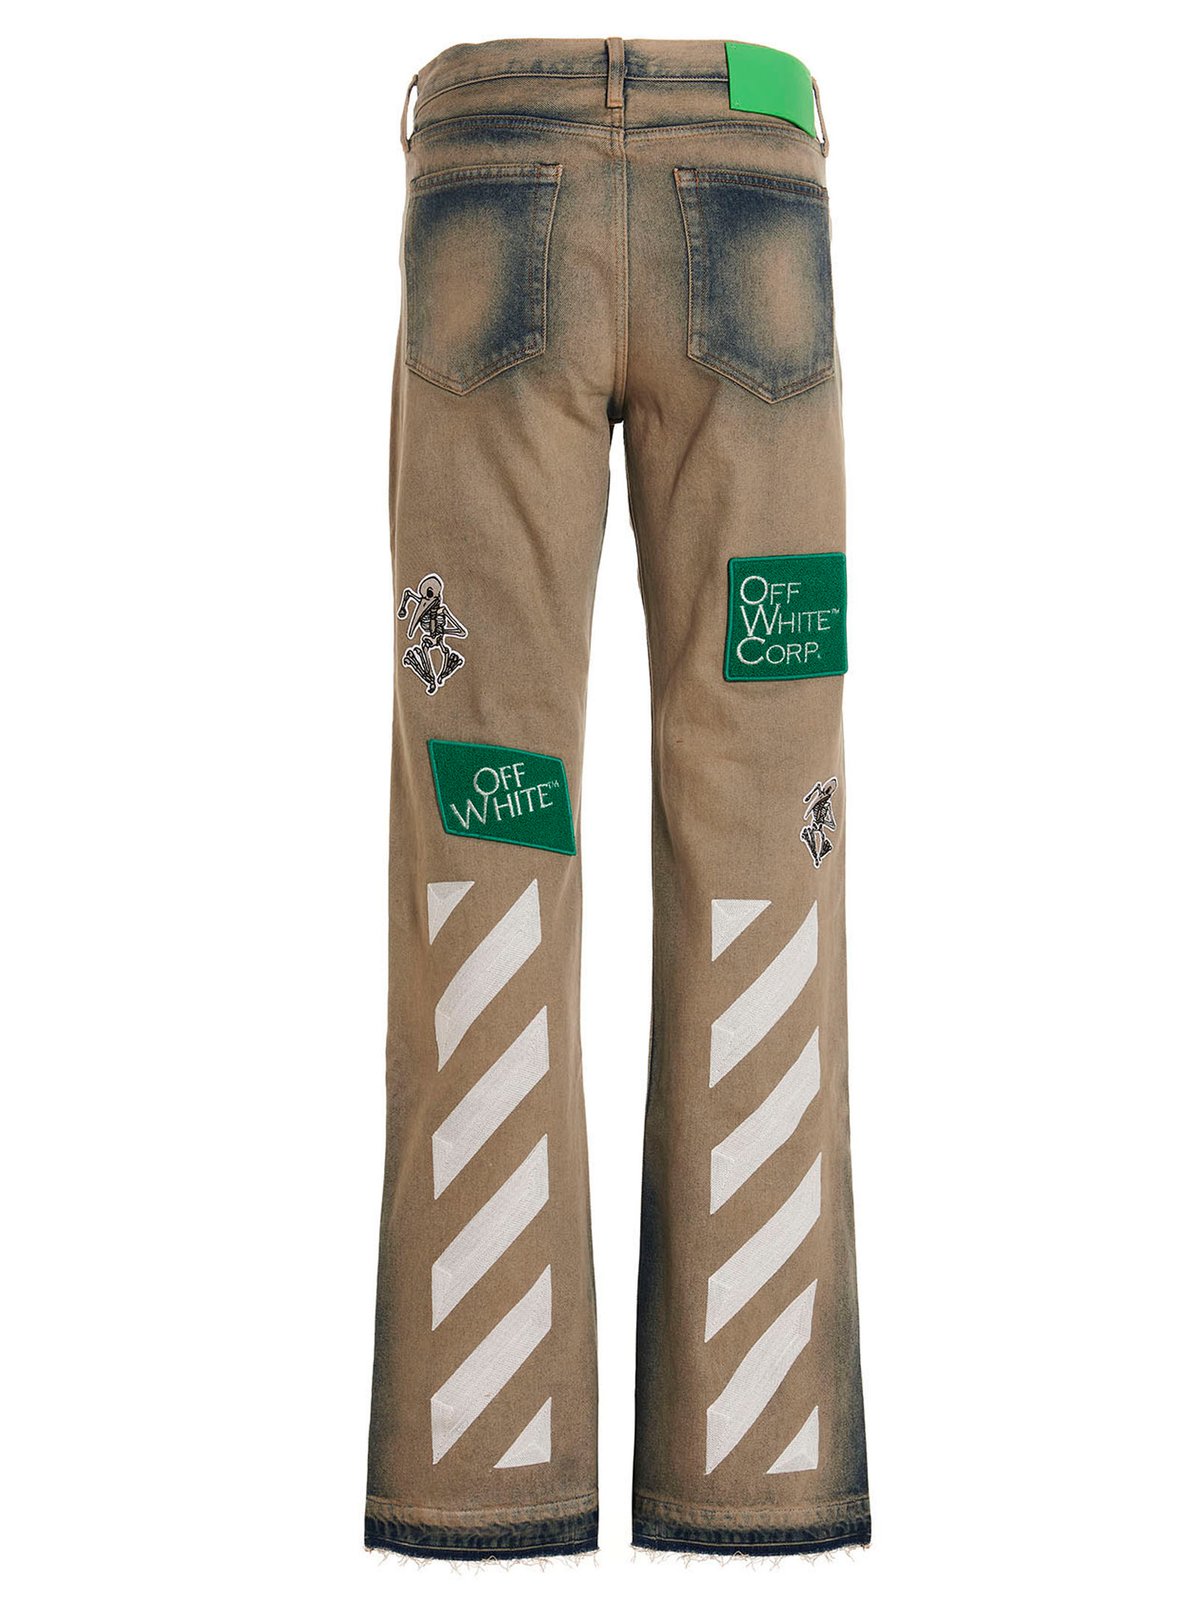 Off-White Diag All-Over Patterned Jeans